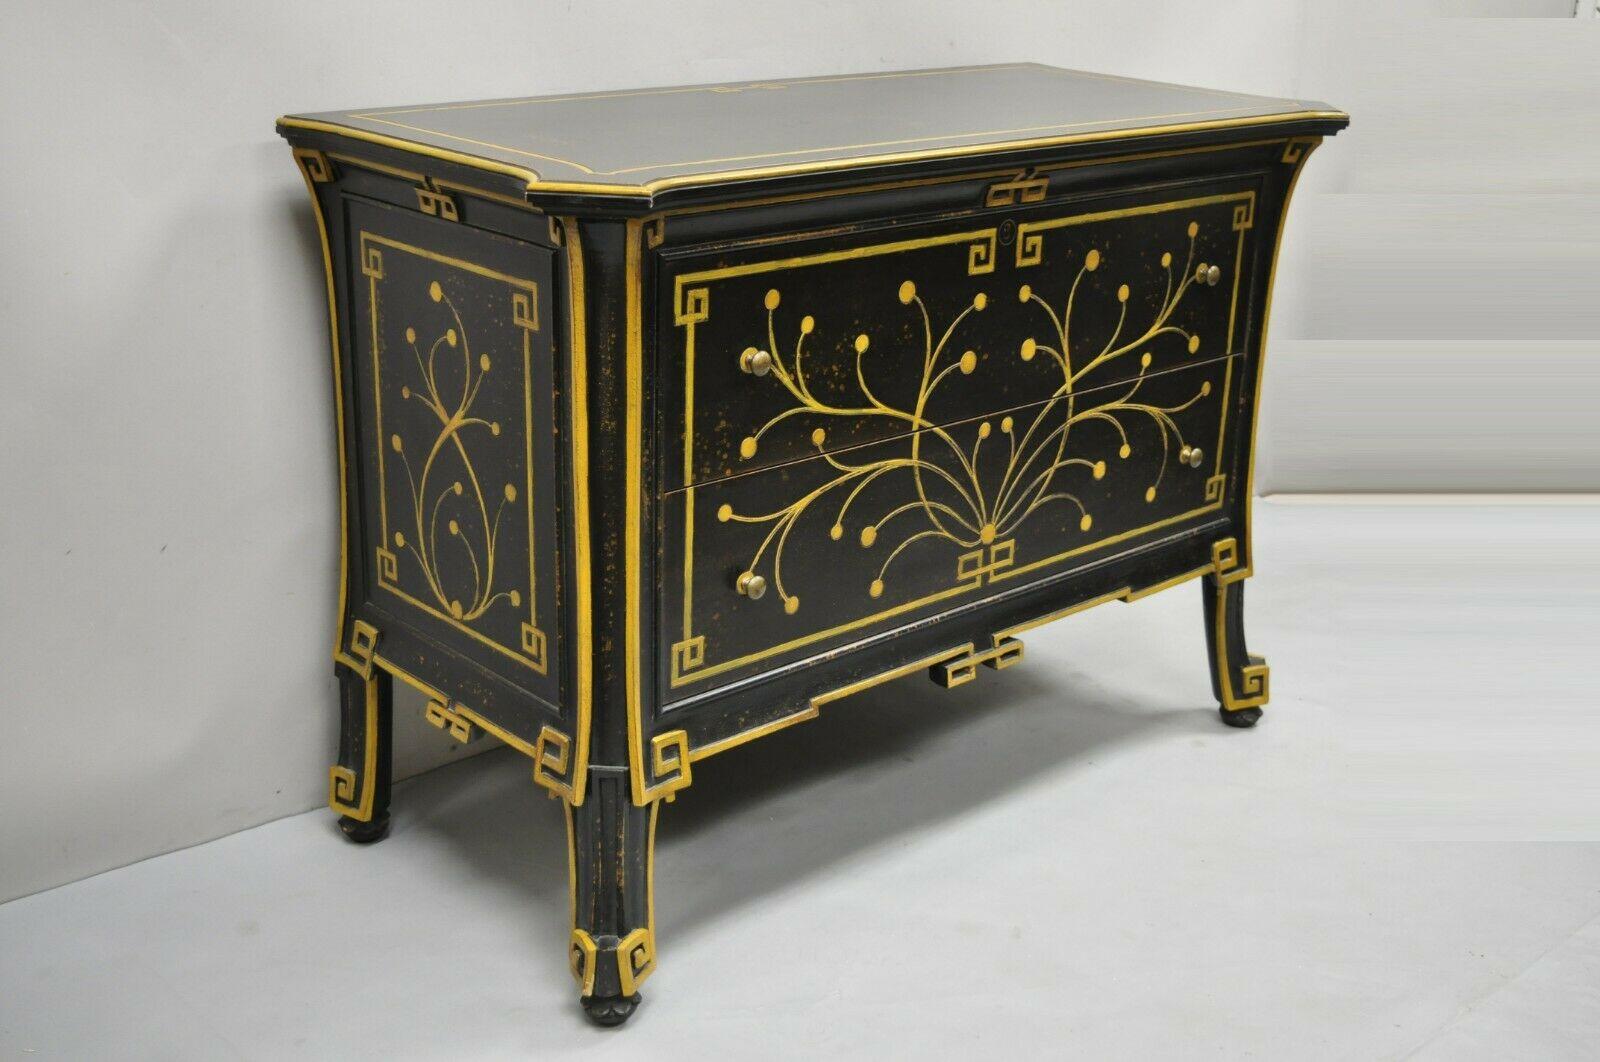 Decorative Crafts Inc Black Ebonized Regency Style 2 Drawer Commode Dresser Chest. Item features gold painted scroll work design, black distress painted ebonized finish, shaped top, original label, no key but unlocked, cabriole legs, 2 drawers, very